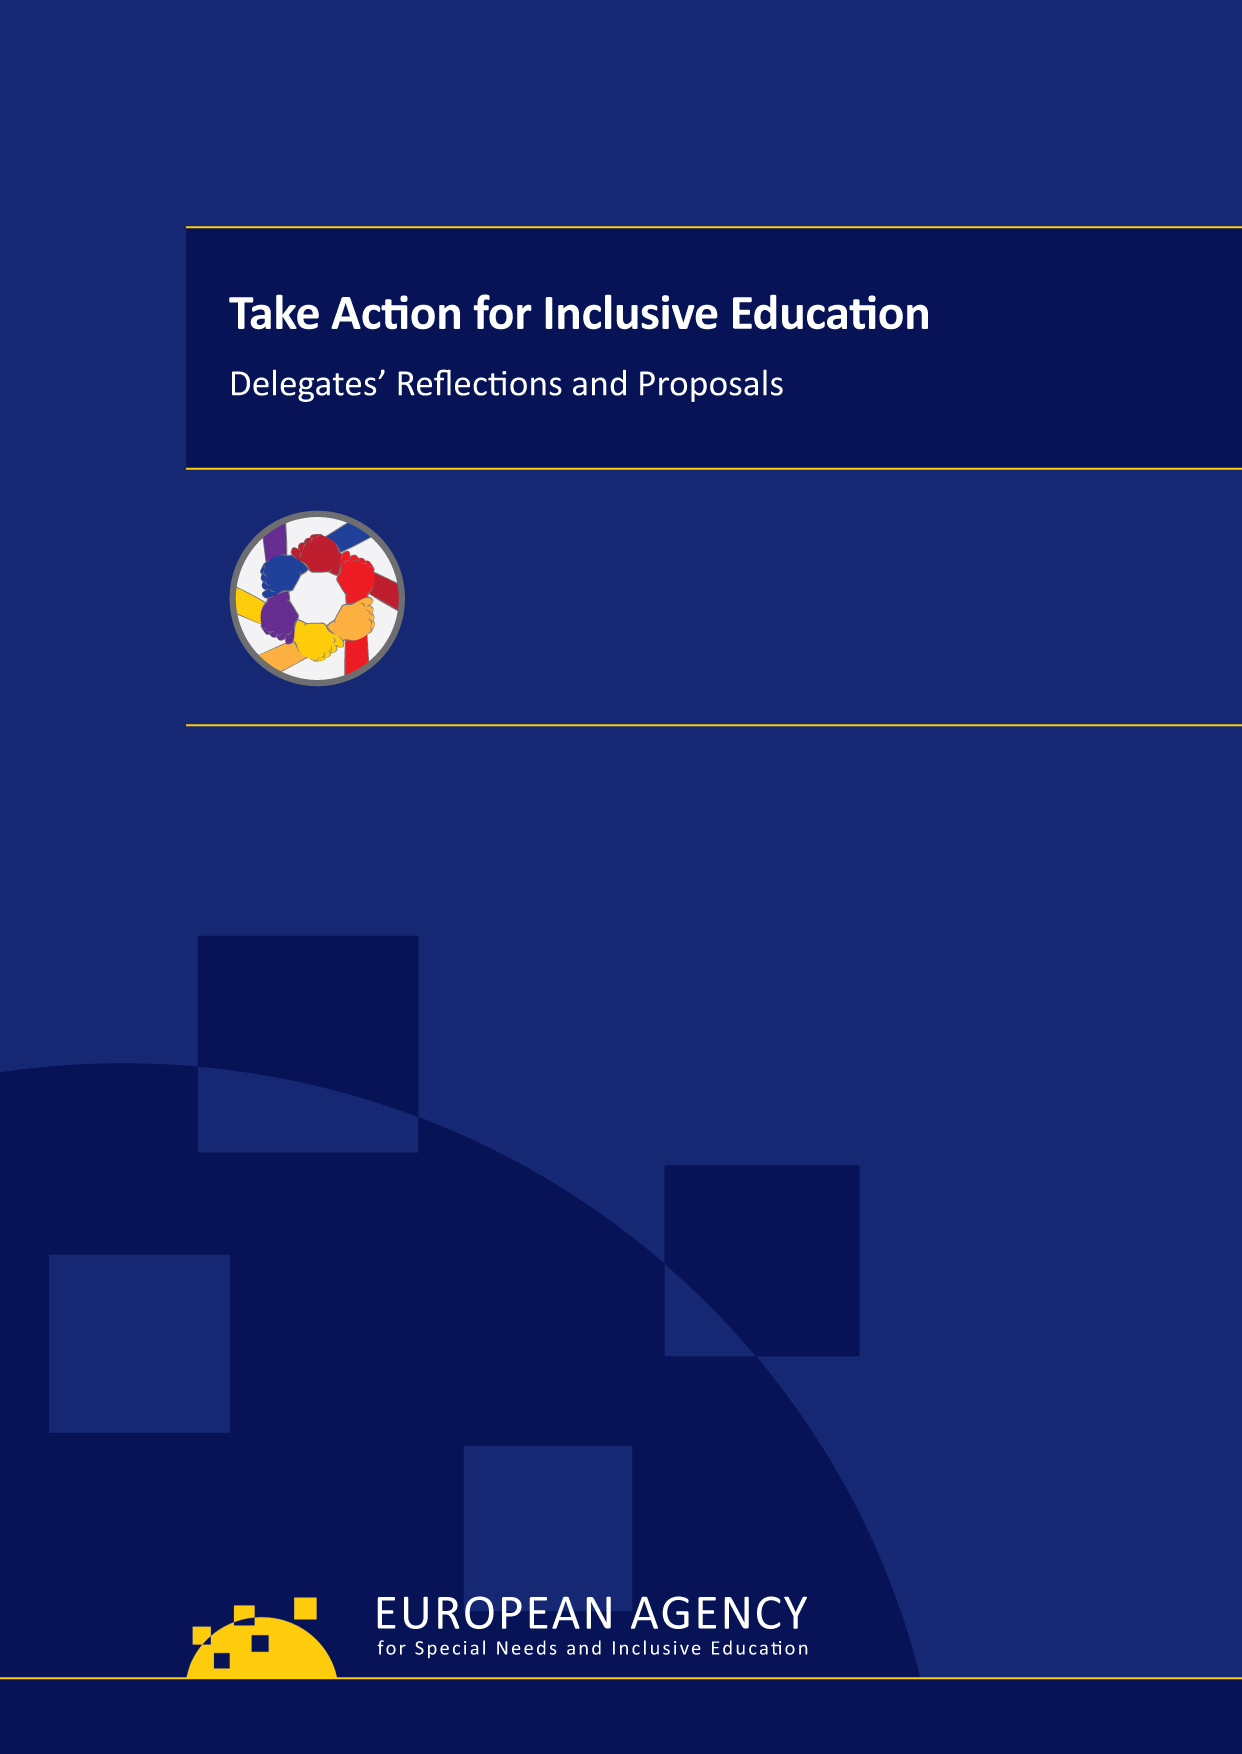 Take Action for Inclusive Education: Delegates' Reflections and Proposals